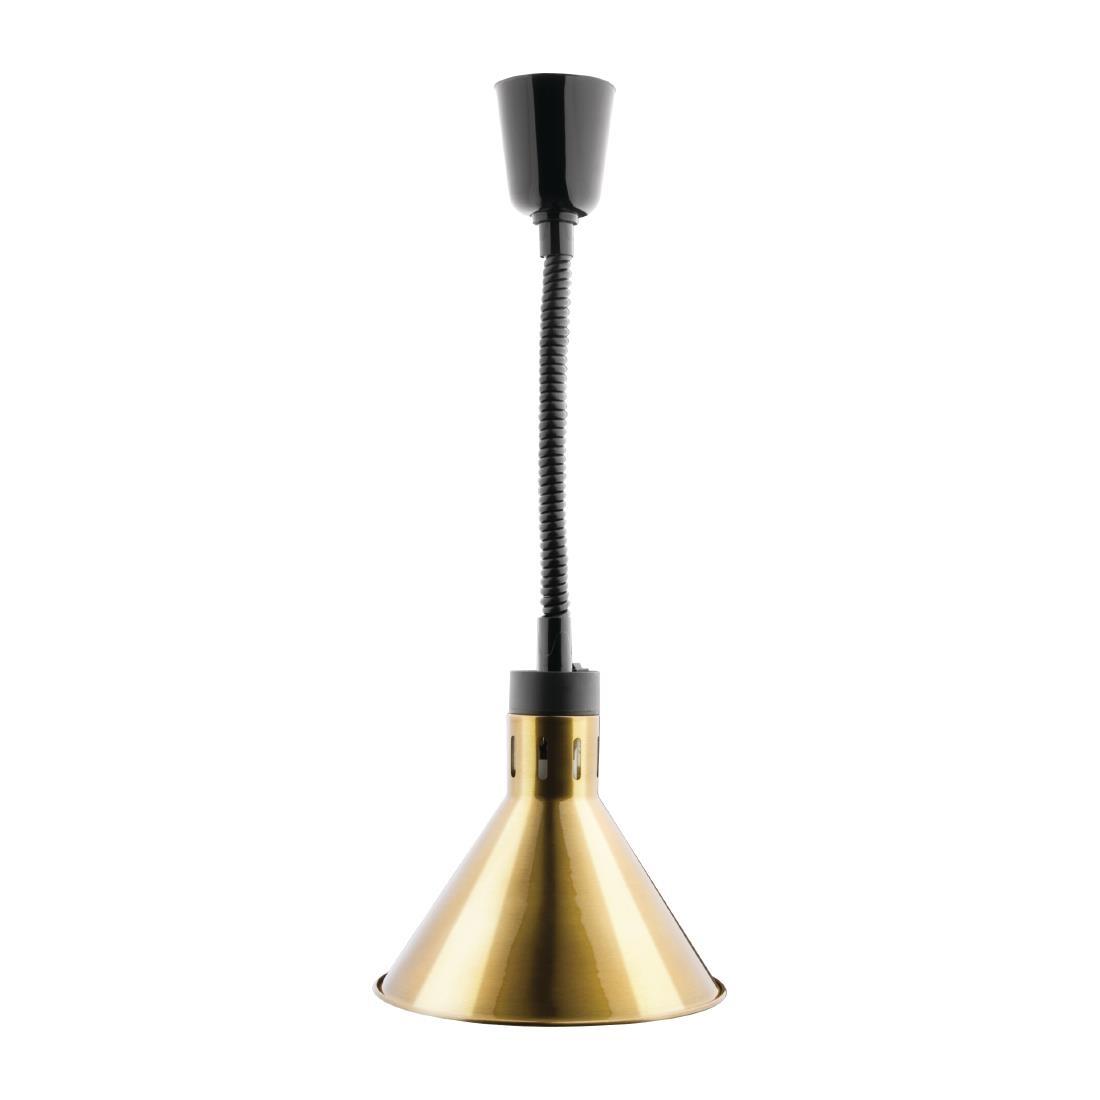 Buffalo Conical Retractable Heat Shade Pale Gold Finish - DY465  - 1